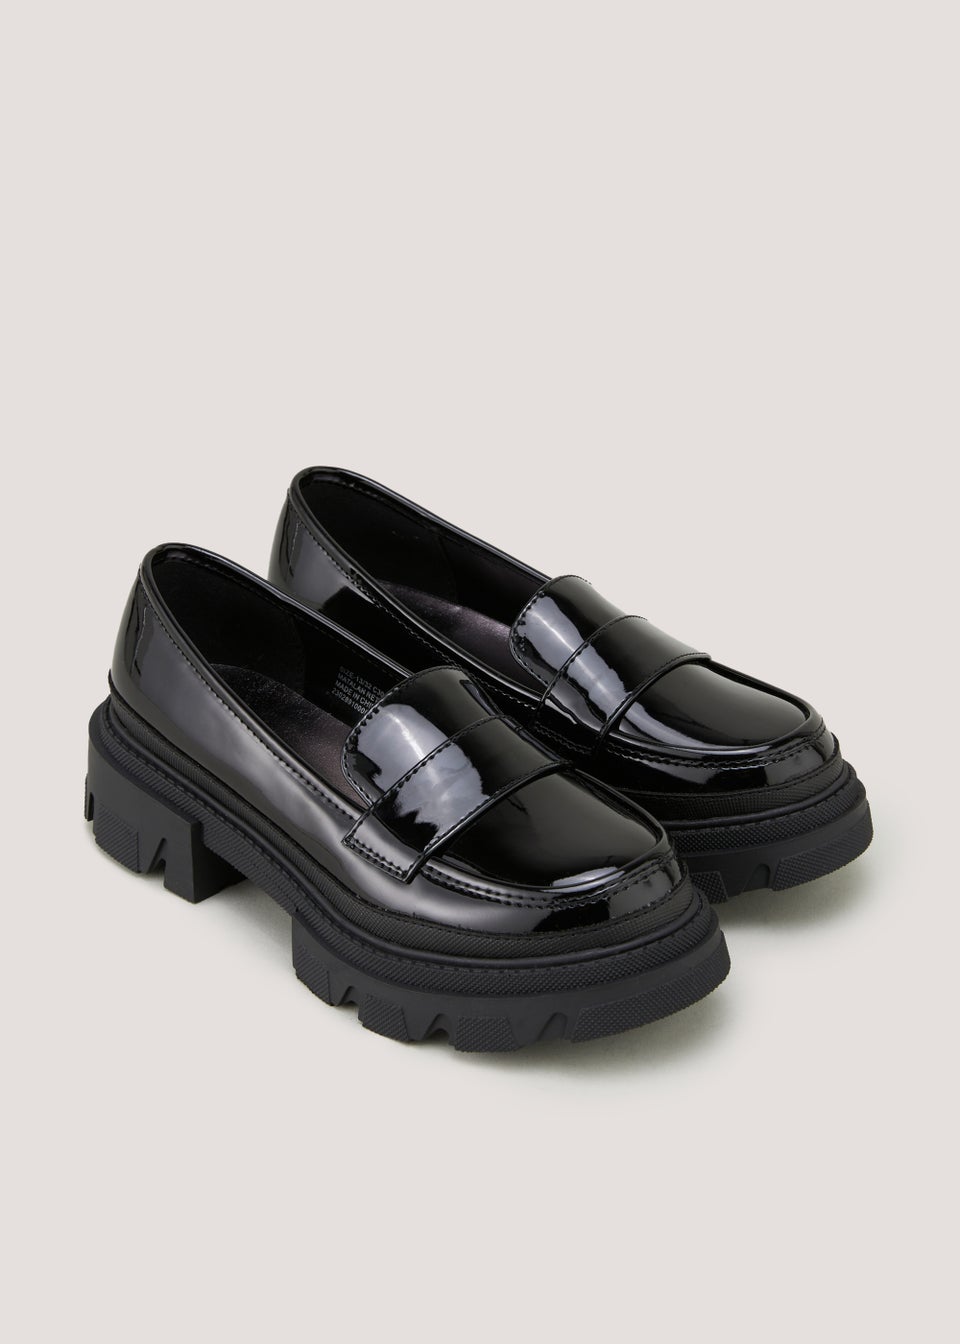 Girls Black Patent Chunky Loafer School Shoes (Younger 13-Older 5 ...